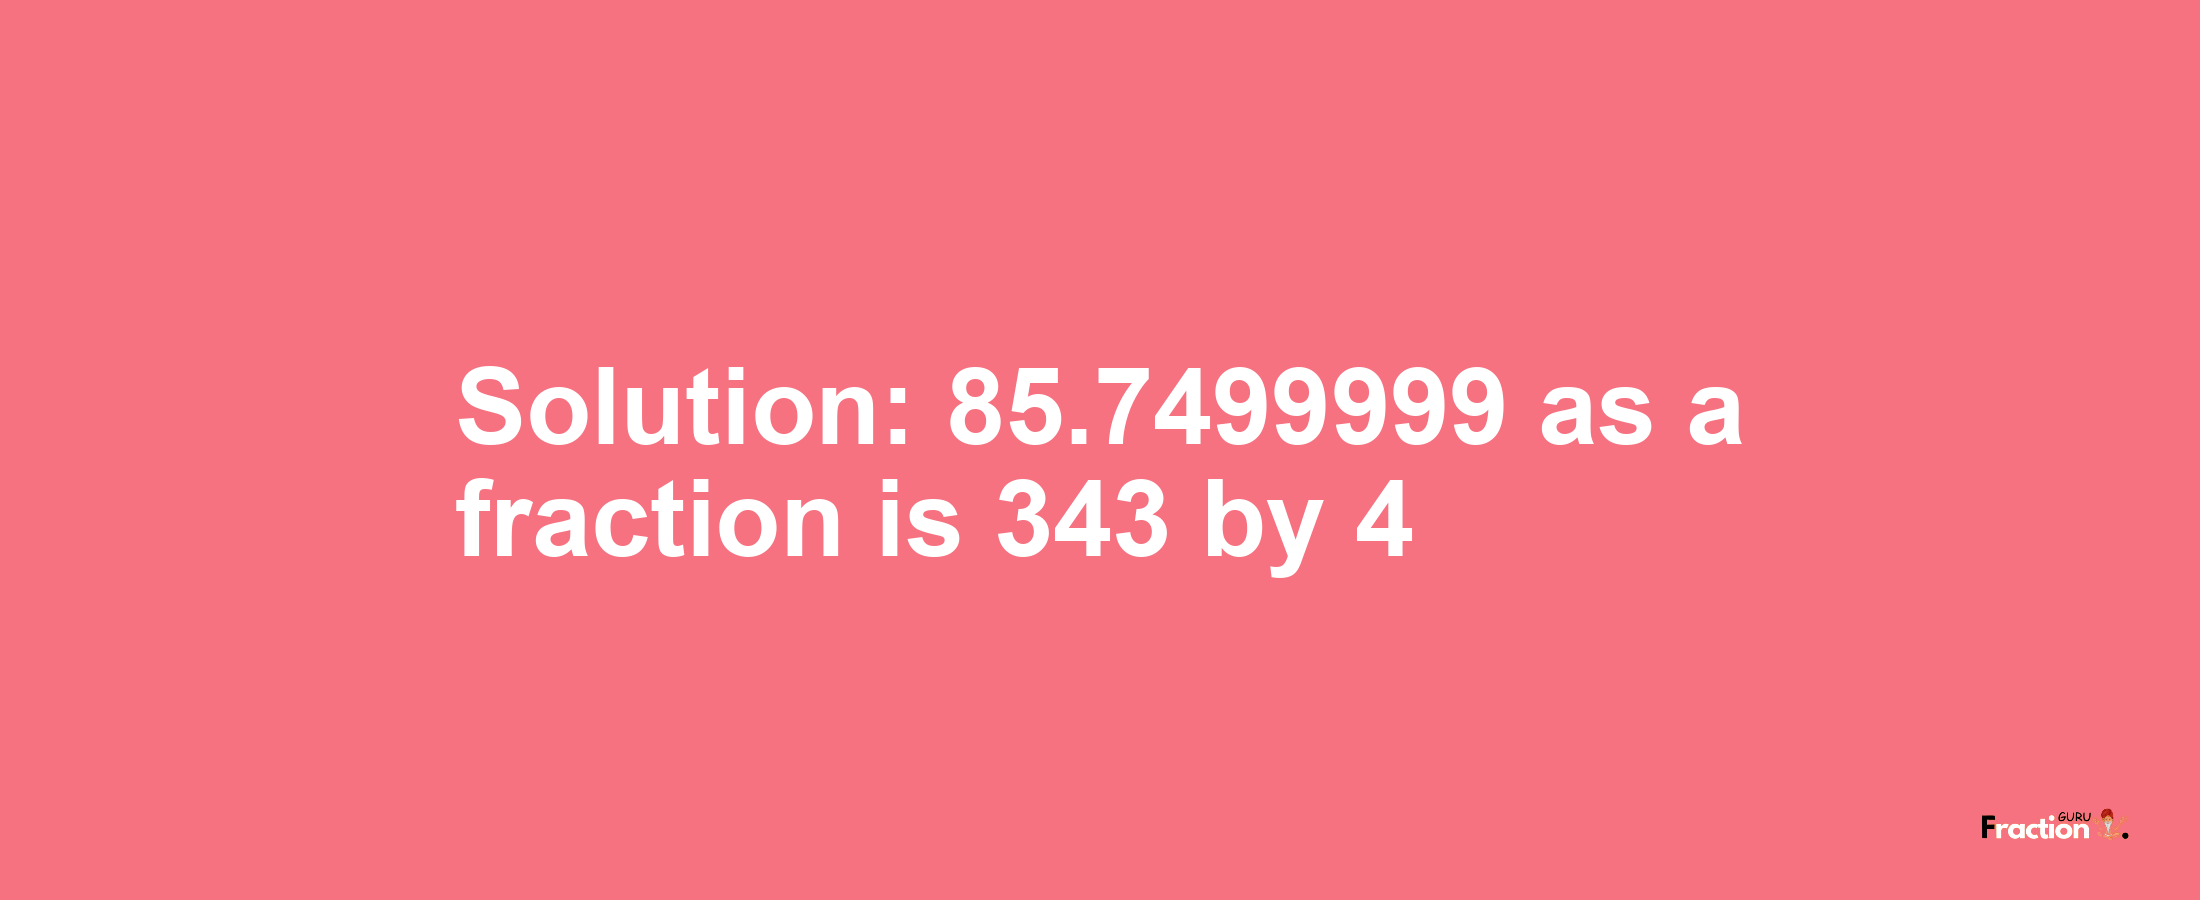 Solution:85.7499999 as a fraction is 343/4